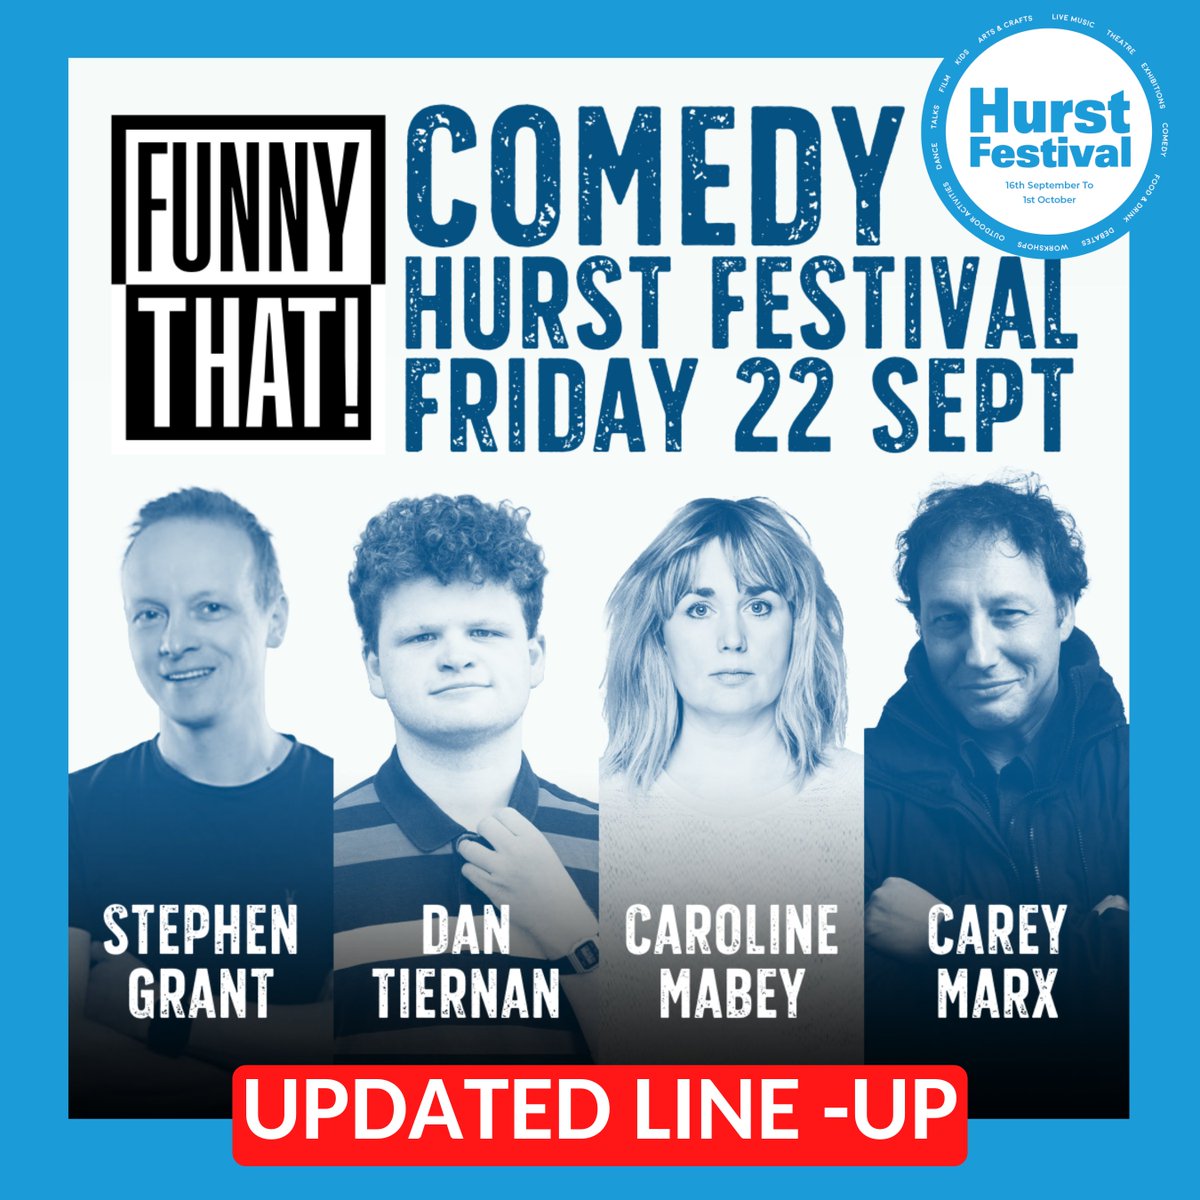 🛑Updated line-up for this Friday's #HurstFestival @FunnyThatComedy night! Getting you in that #fridayfeeling on 22nd September we have; 🌟 @stephencgrant 🌟 @tiernancomedian 🌟 @CarolineMabey 🌟 @CareyMarx